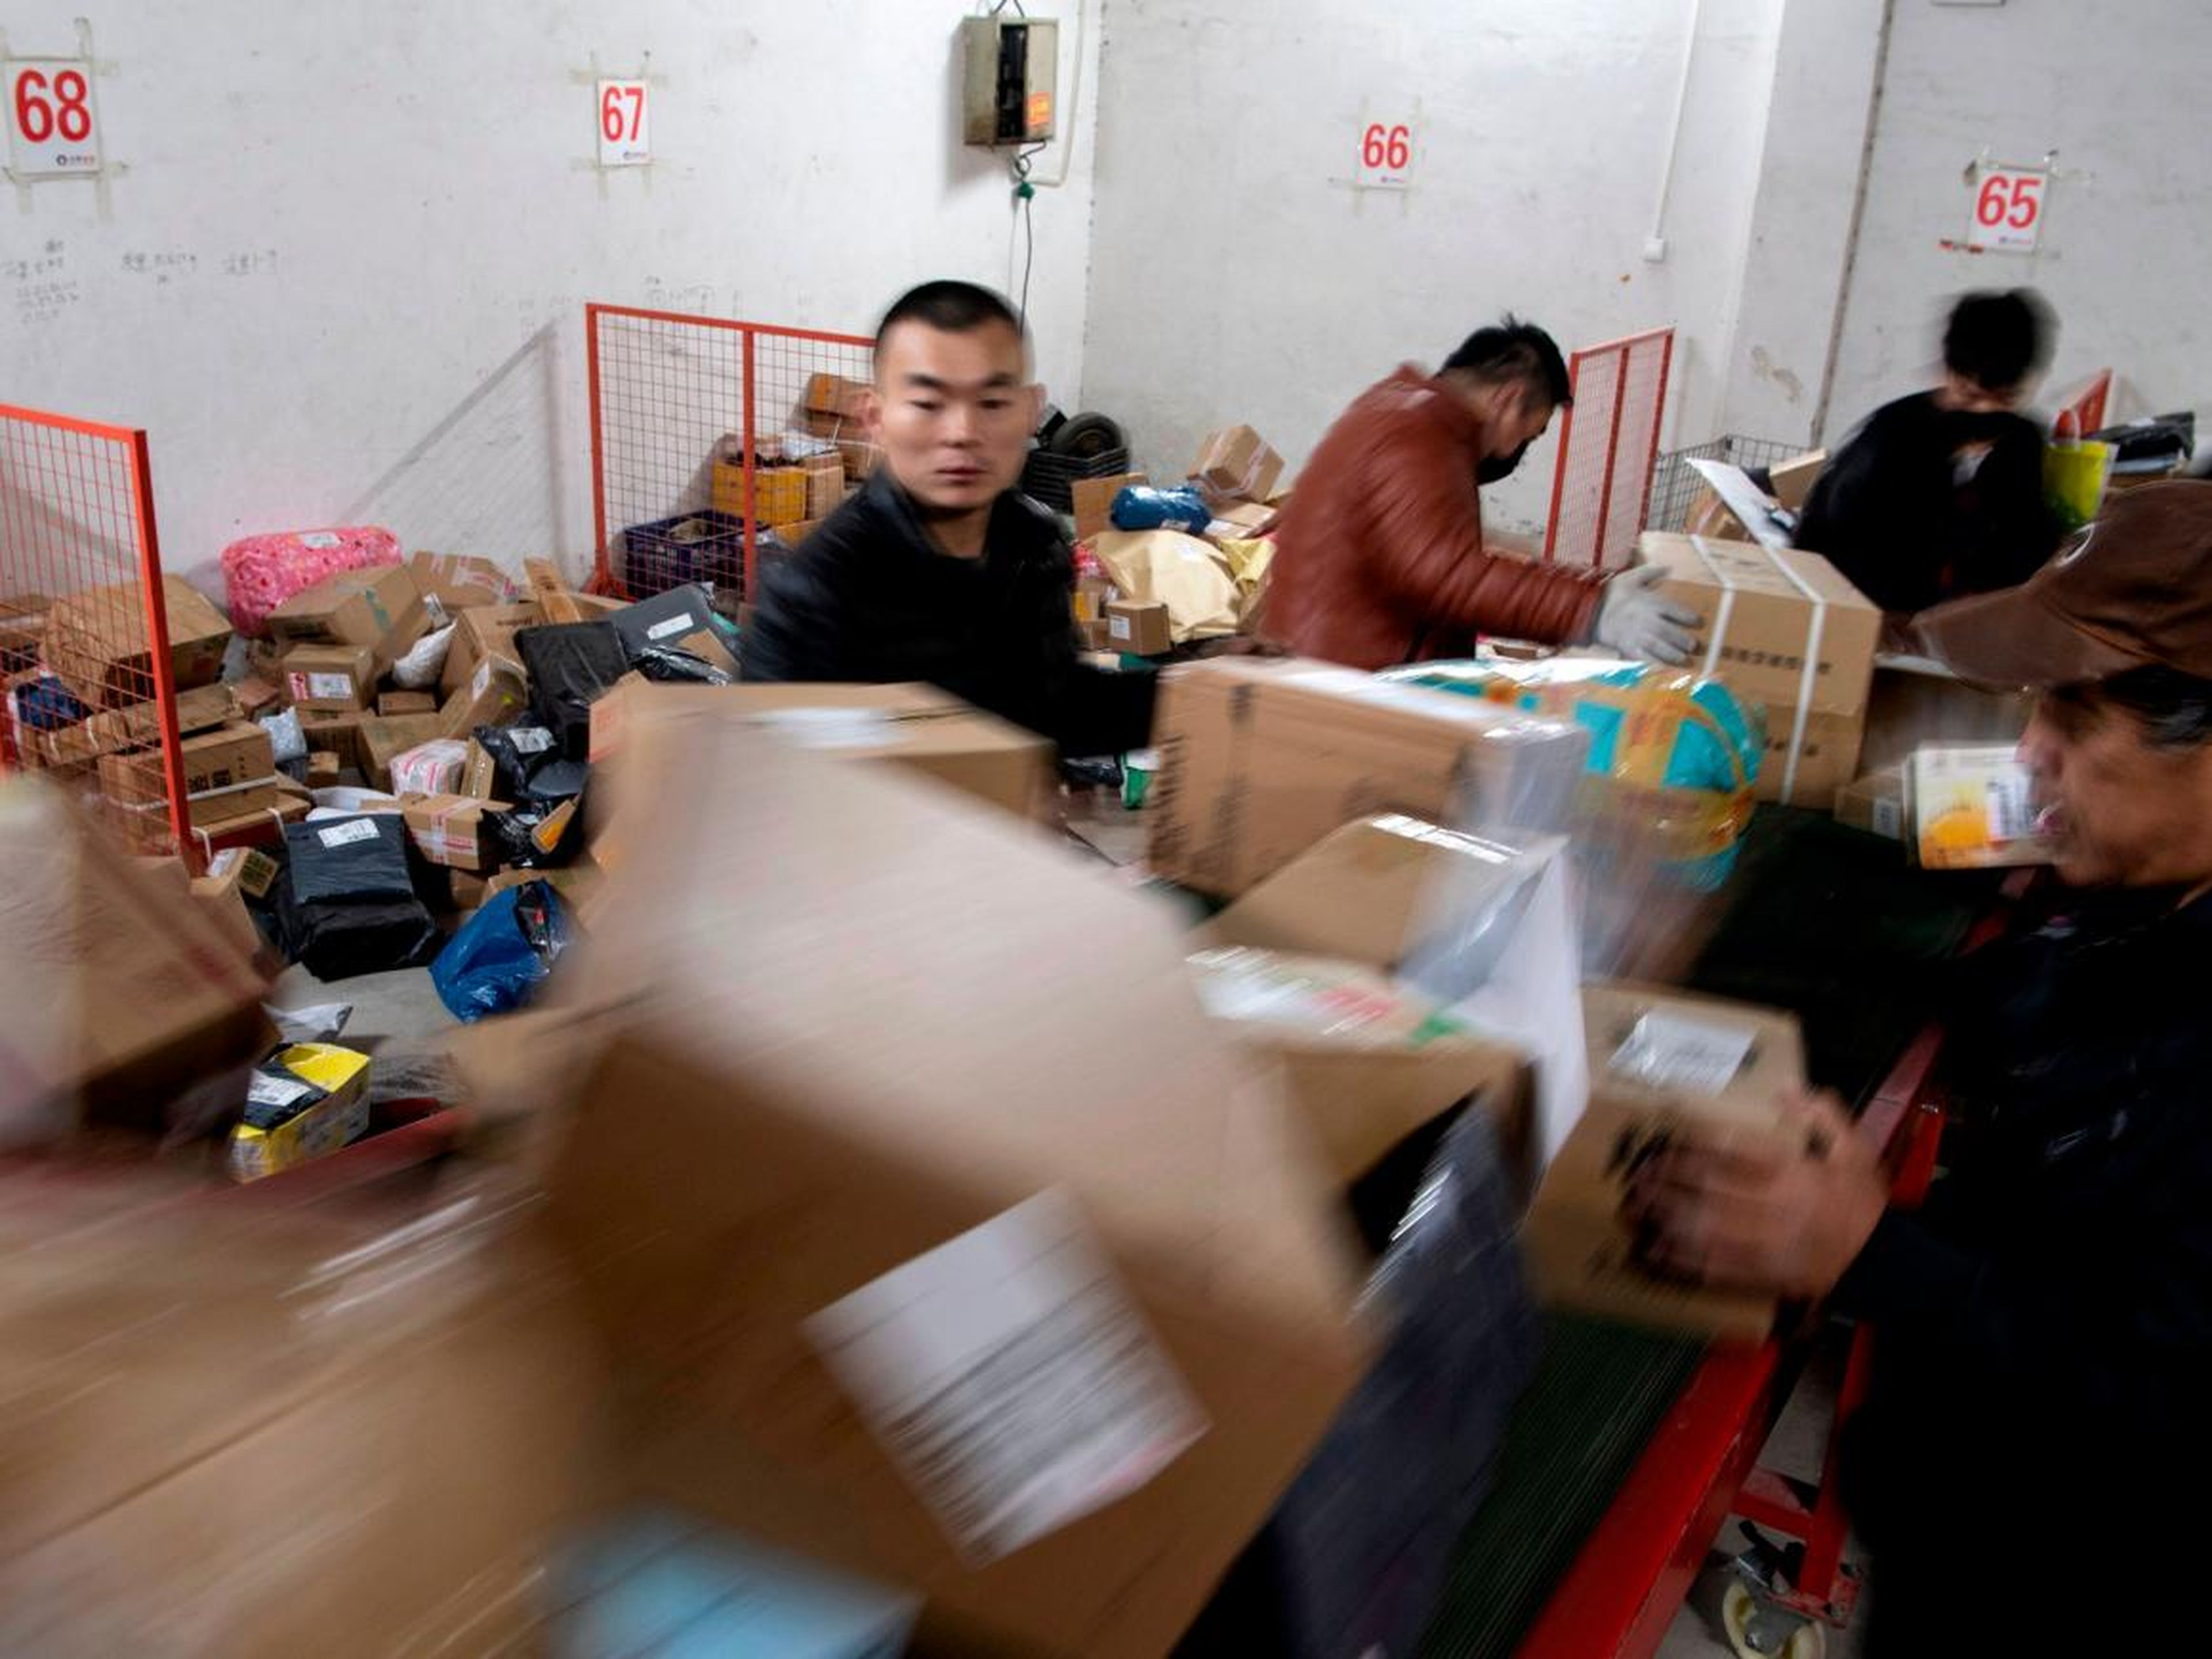 Employees have already been pictured sorting packages in Chinese warehouses in Beijing to get them on the way to customers.